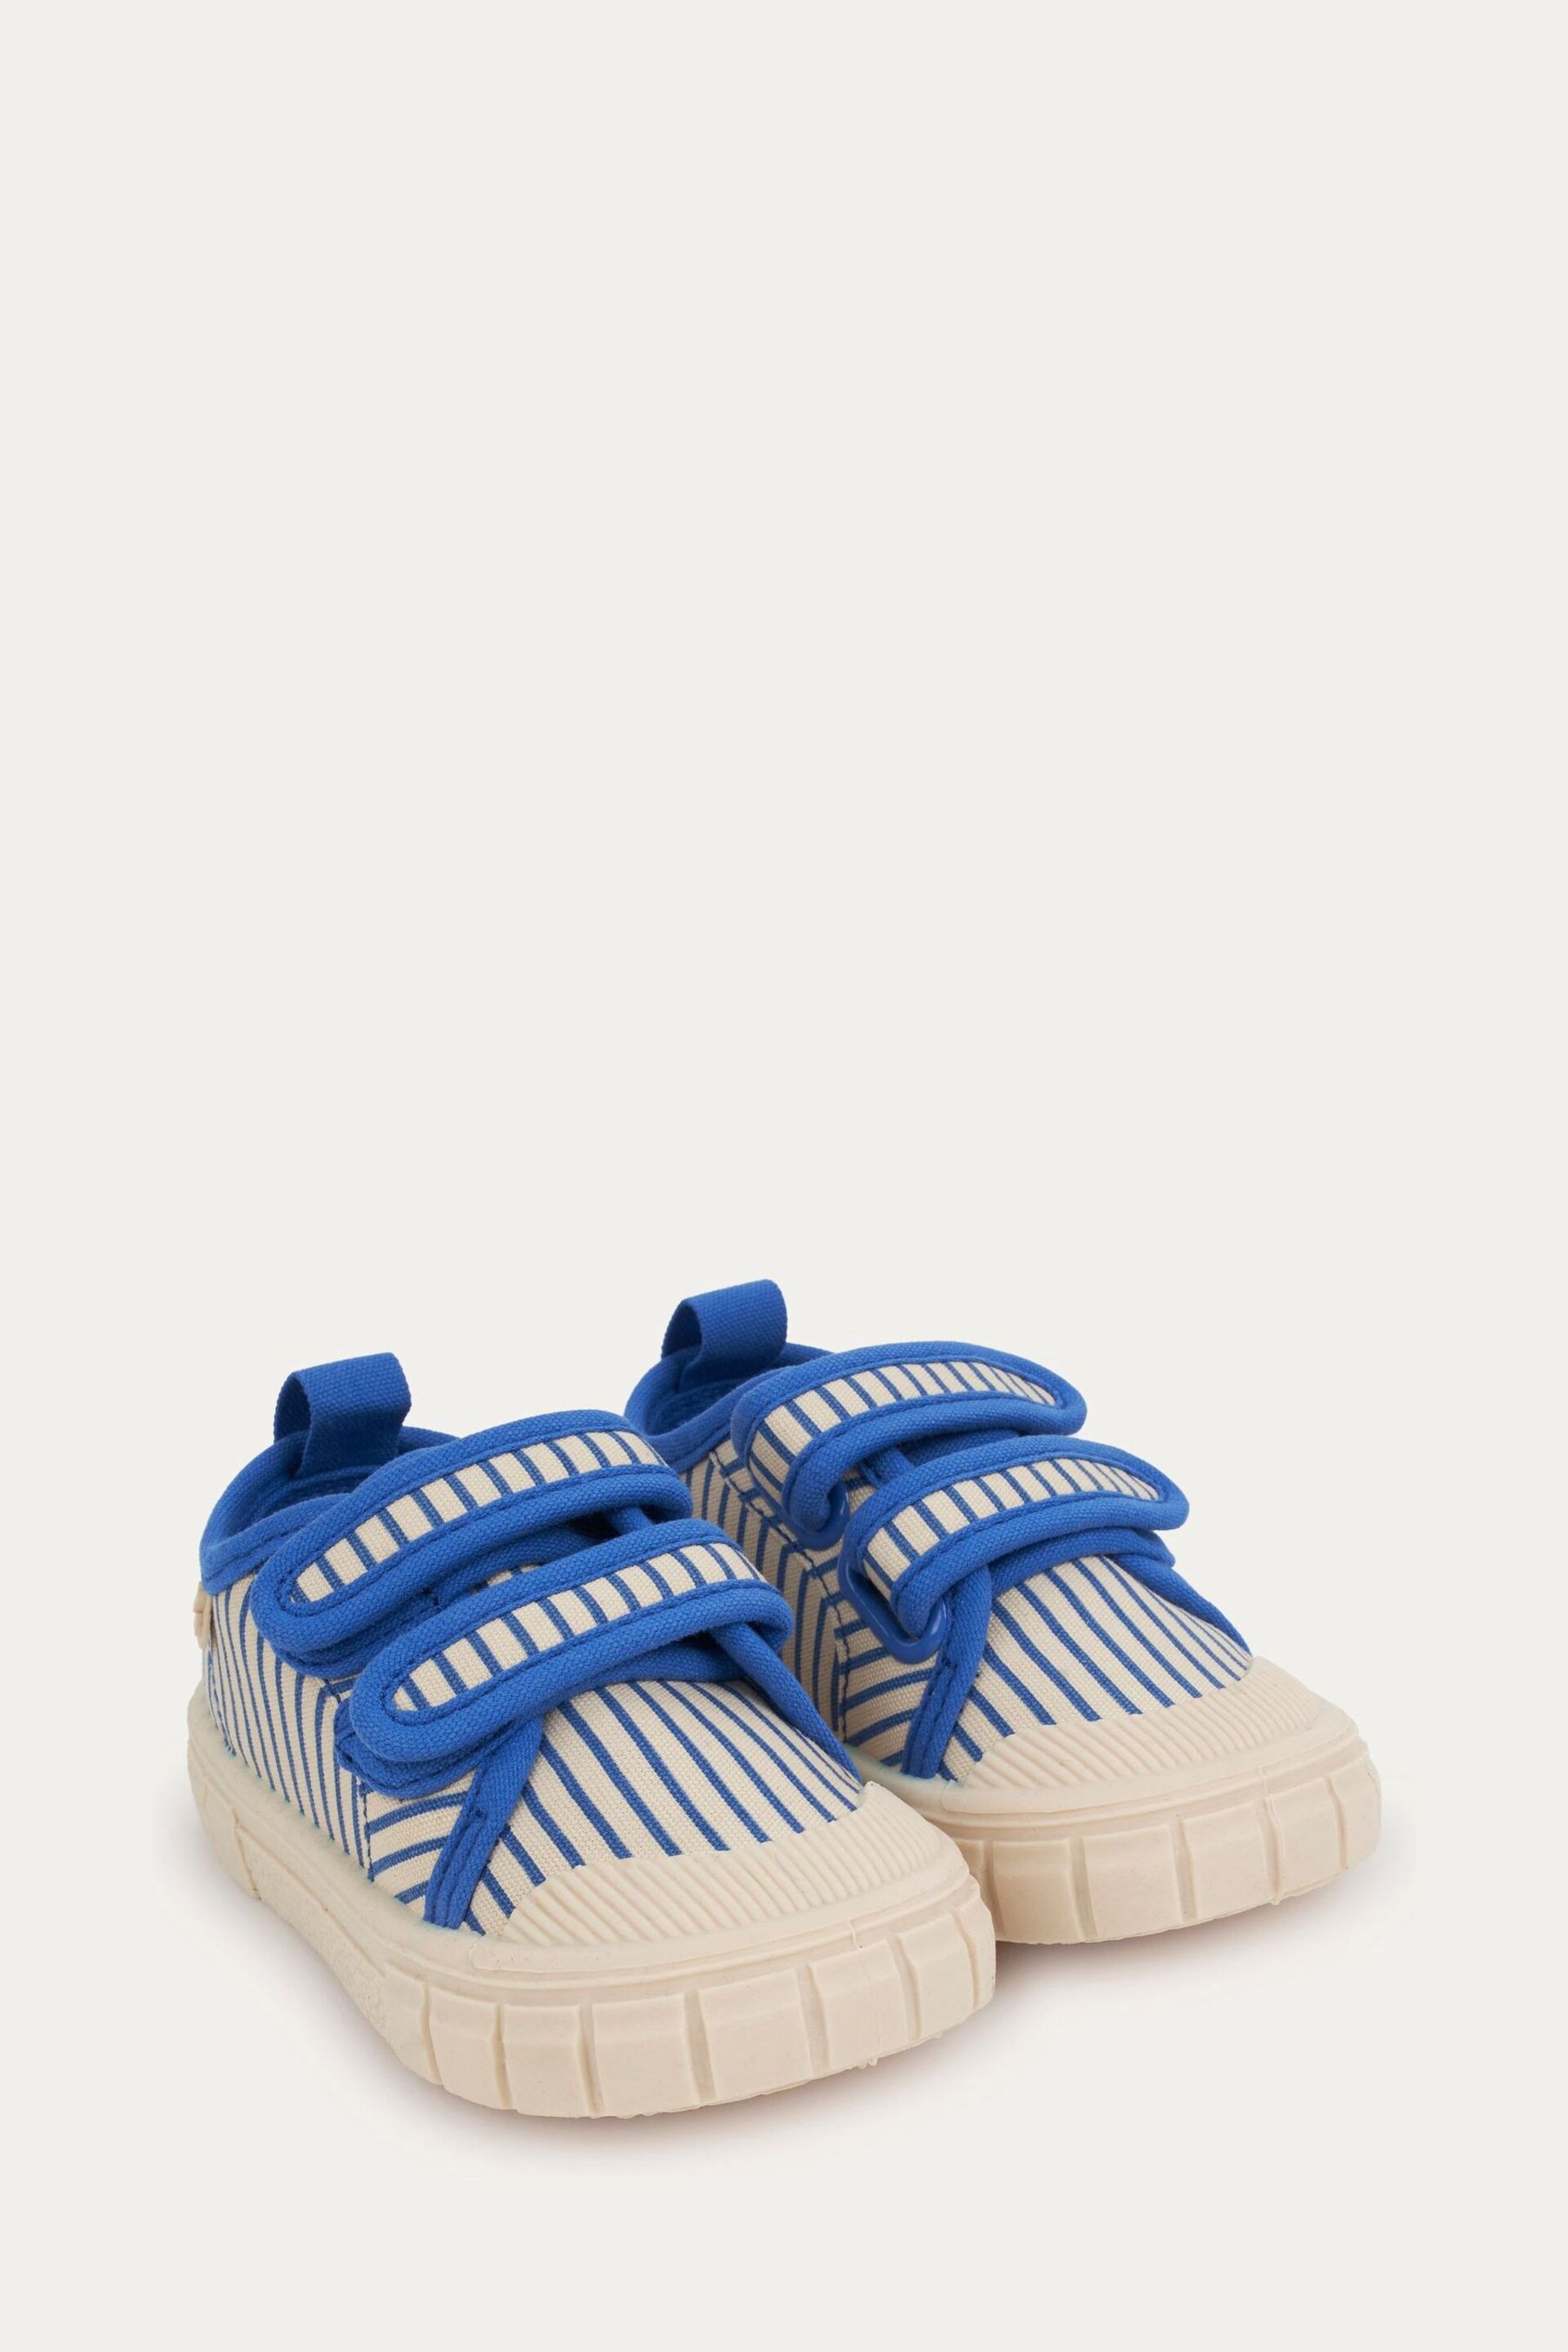 KIDLY Stripe Canvas Trainers - Image 2 of 4